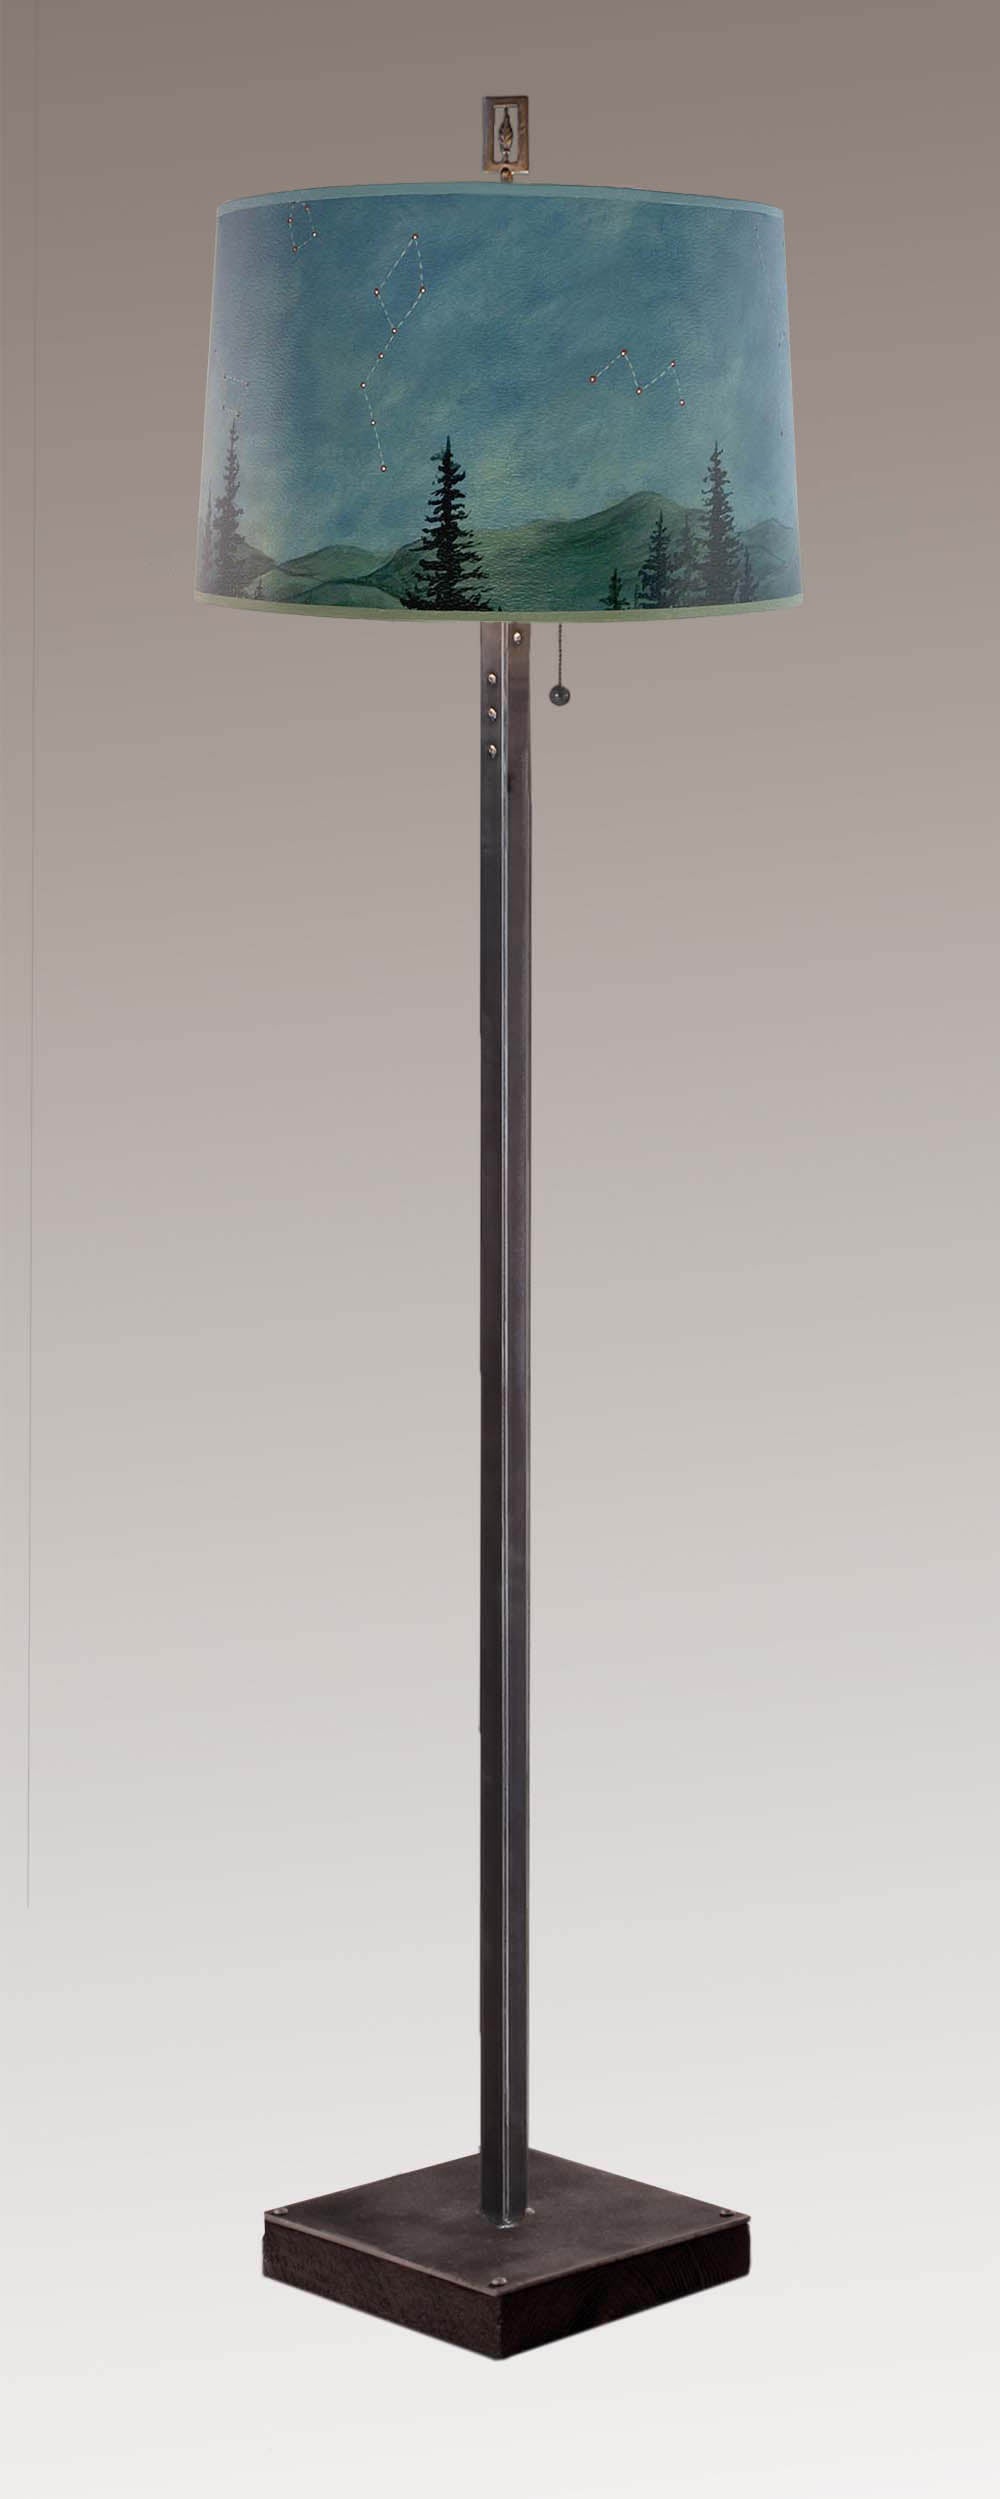 Janna Ugone &amp; Co Floor Lamps Steel Floor Lamp on Reclaimed Wood with Large Drum Shade in Midnight Sky